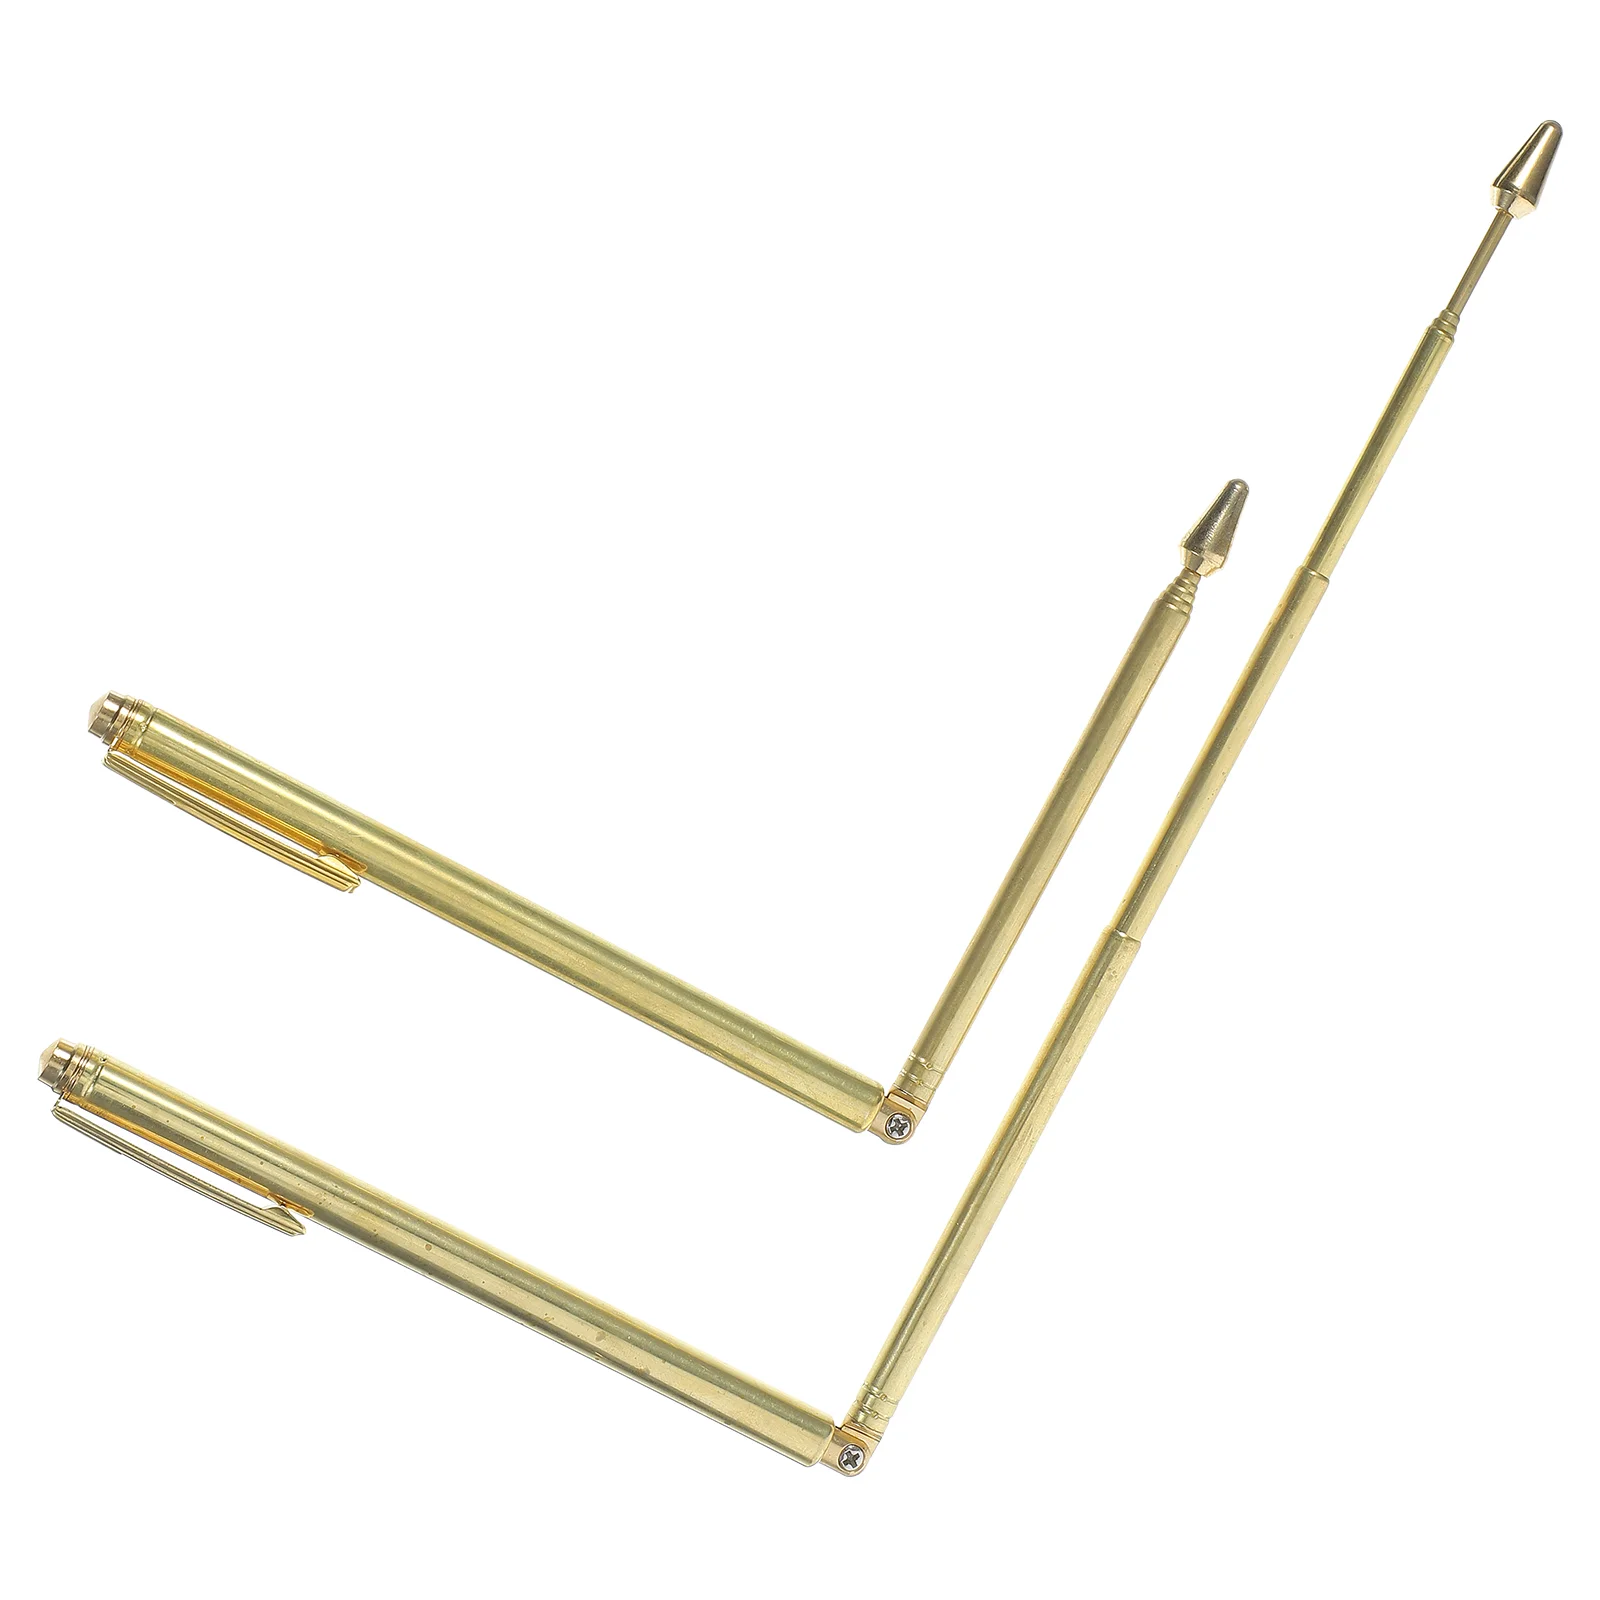 

2 Pcs Probe Stick Water Dowsing Rod Rods for Compass Pure Brass Stainless Steel Portable Divining Outdoor Tool